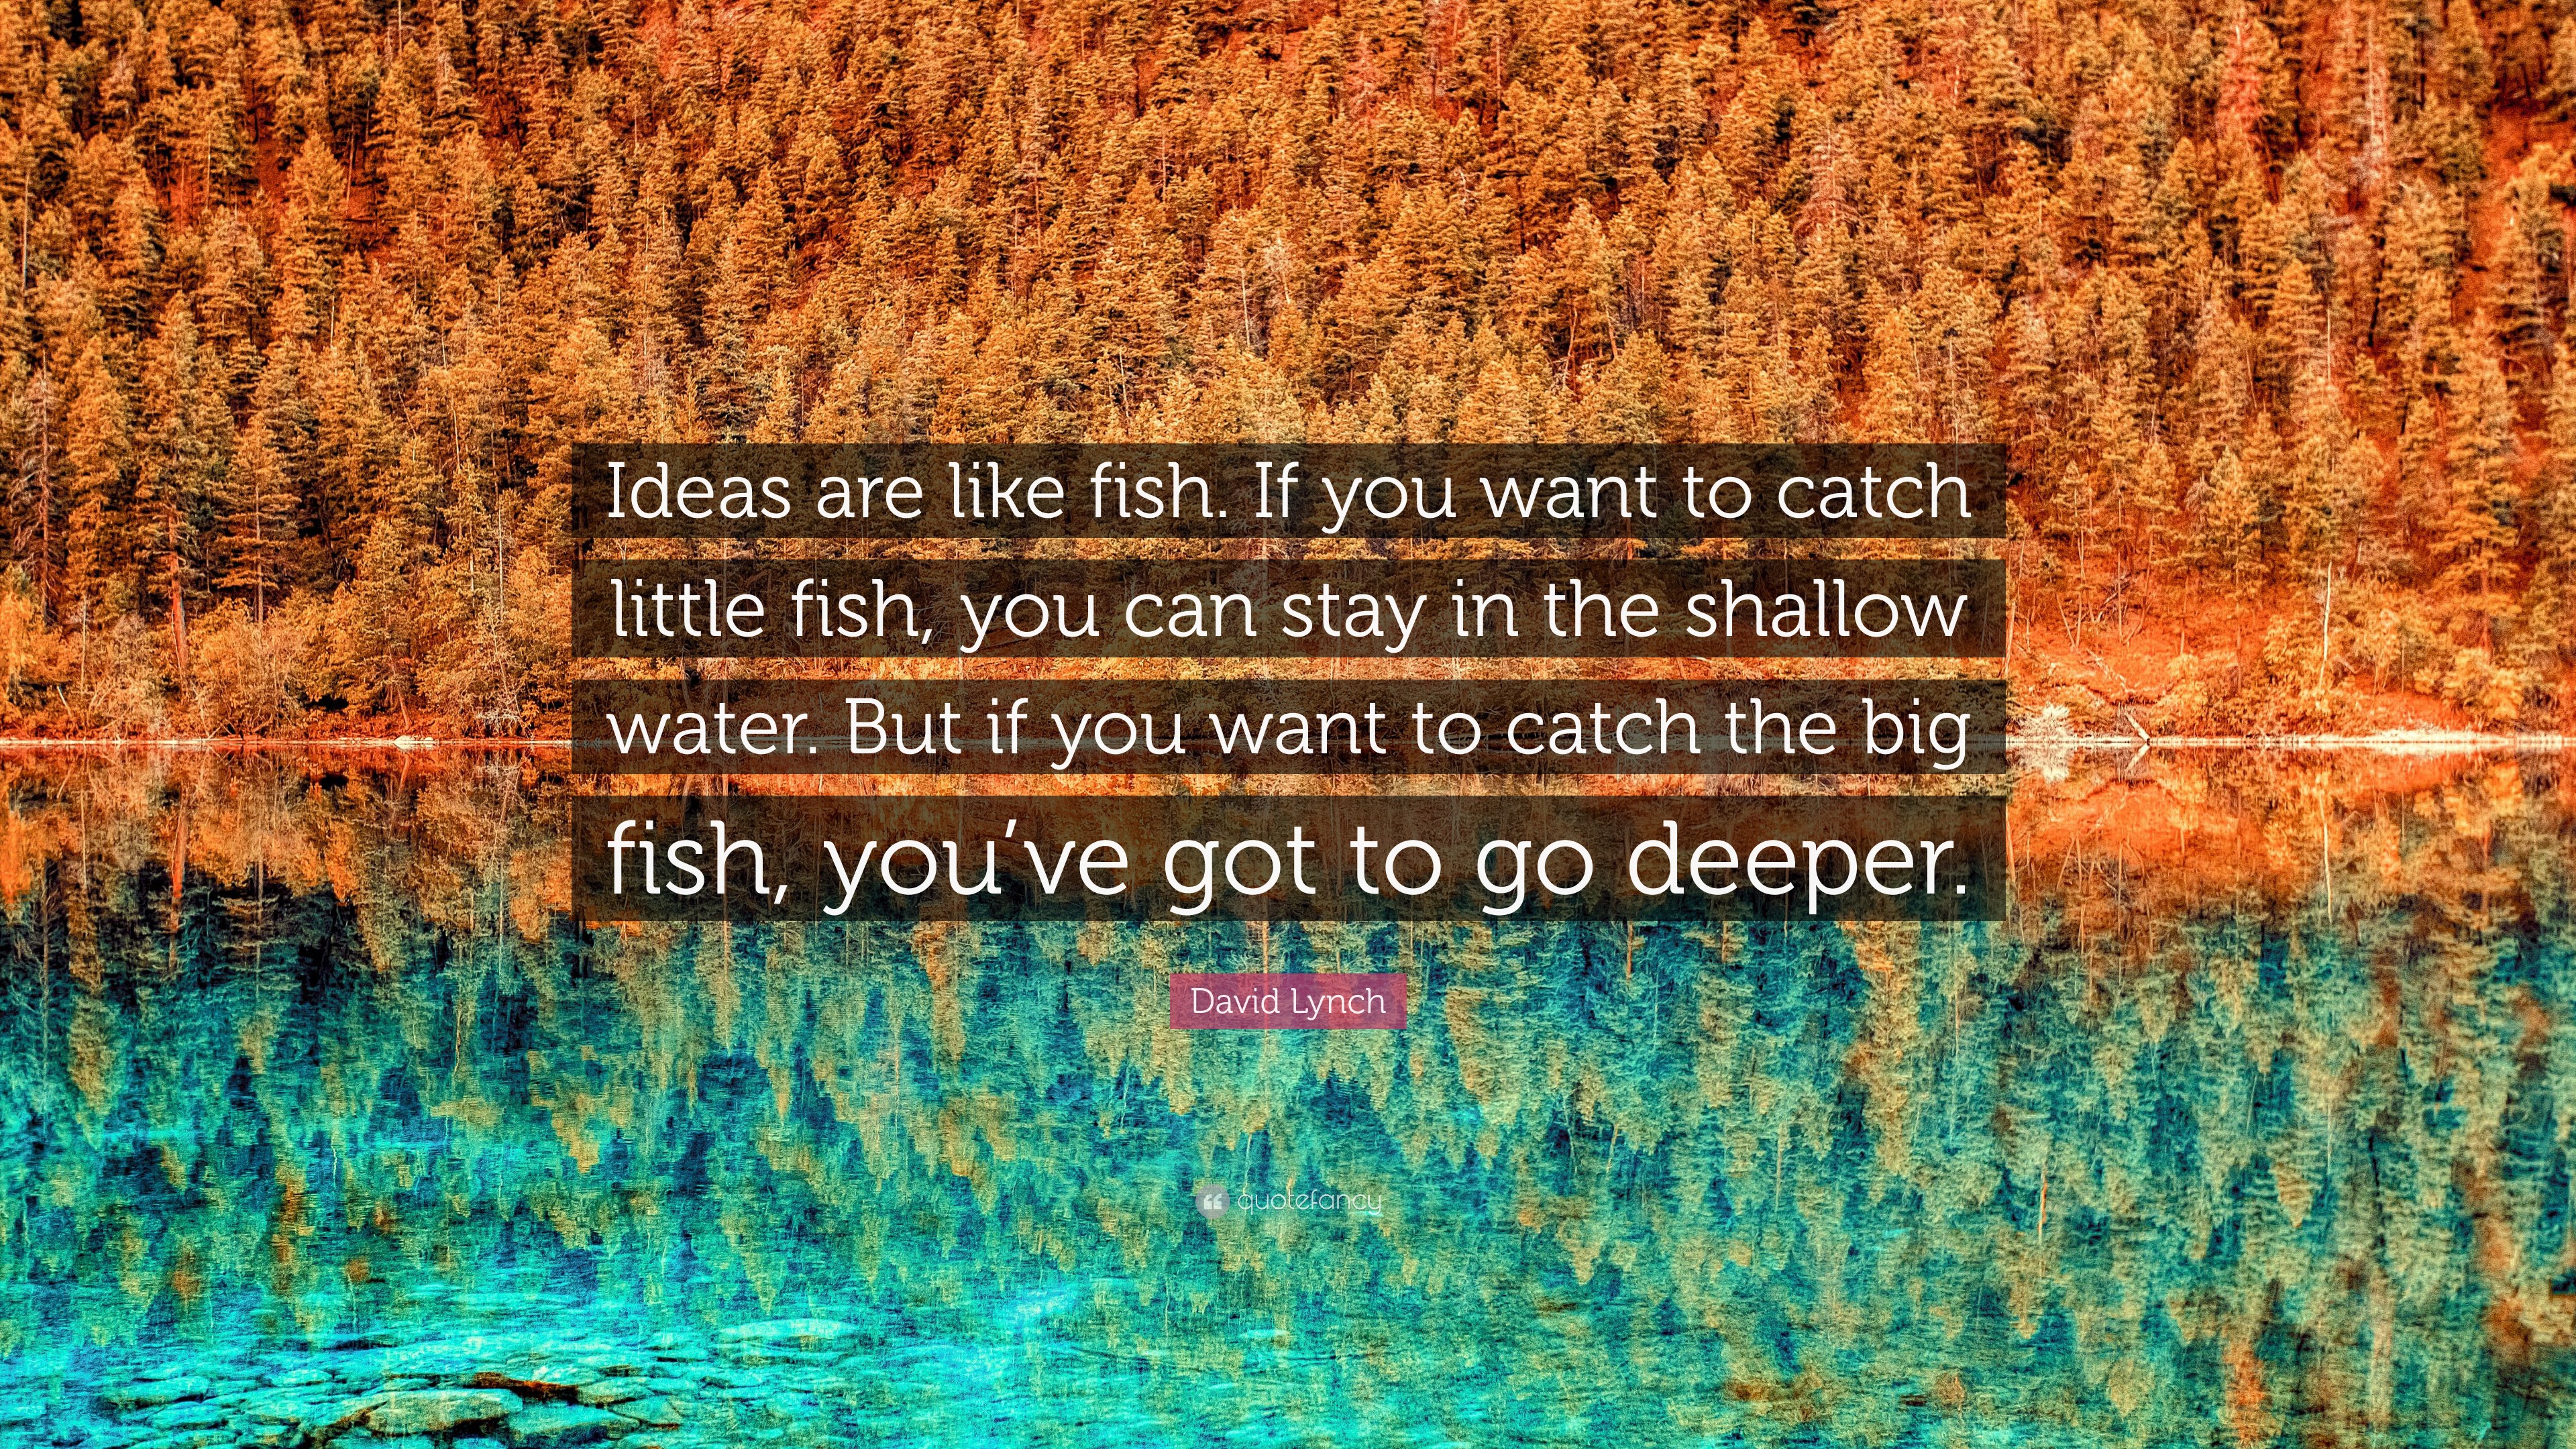 David Lynch Quote: “Ideas are like fish. If you want to catch little fish,  you can stay in the shallow water. But if you want to catch the b”